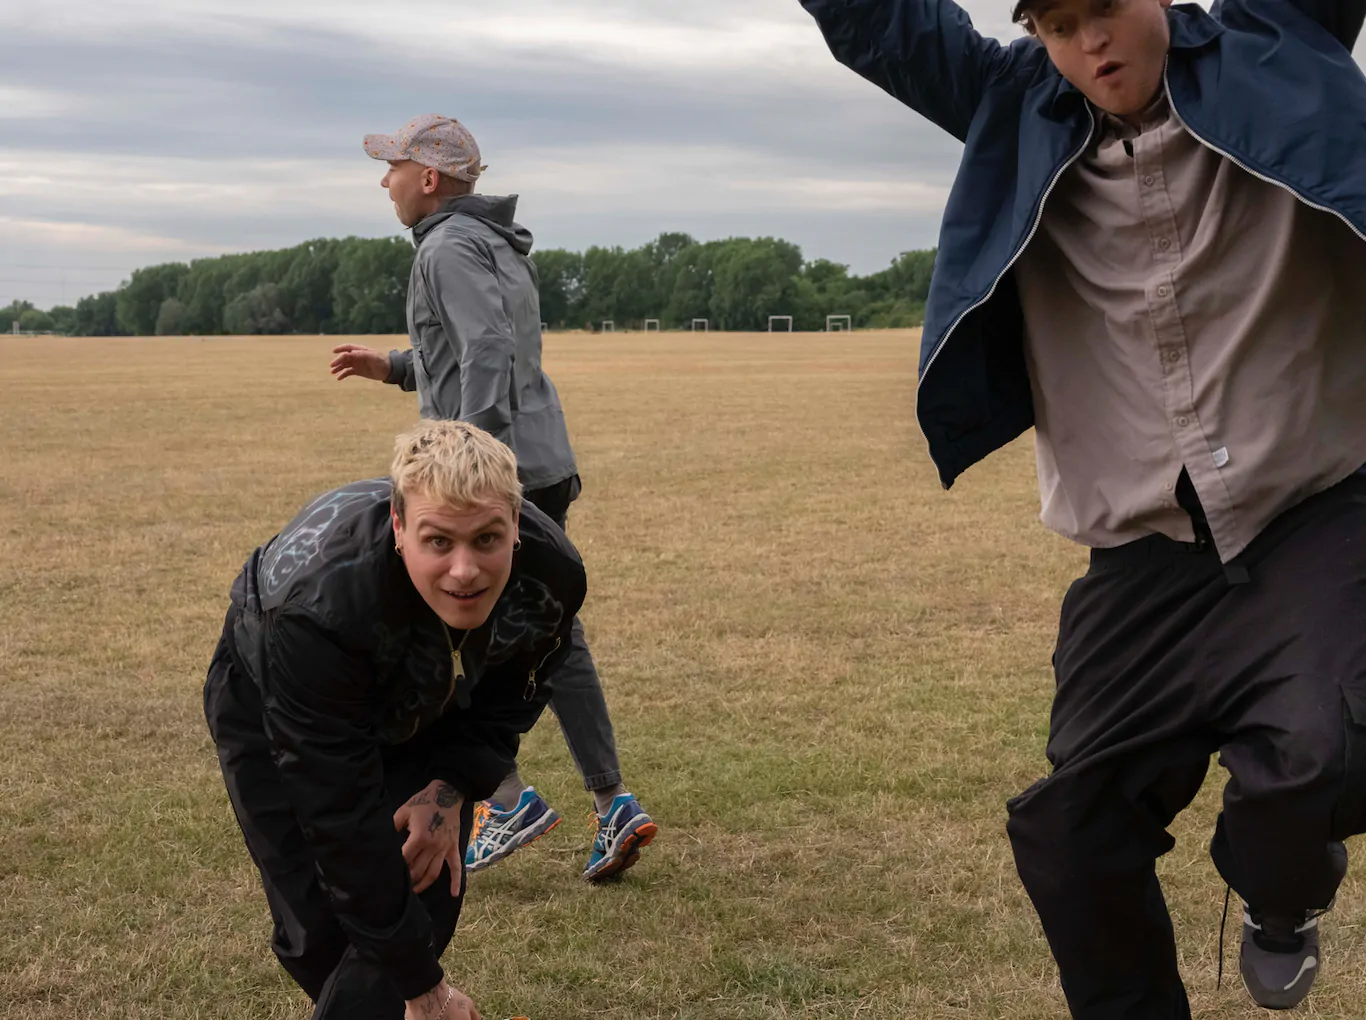 DMA’S announce headline show at the Telegraph Building, Belfast on Wednesday 24th May